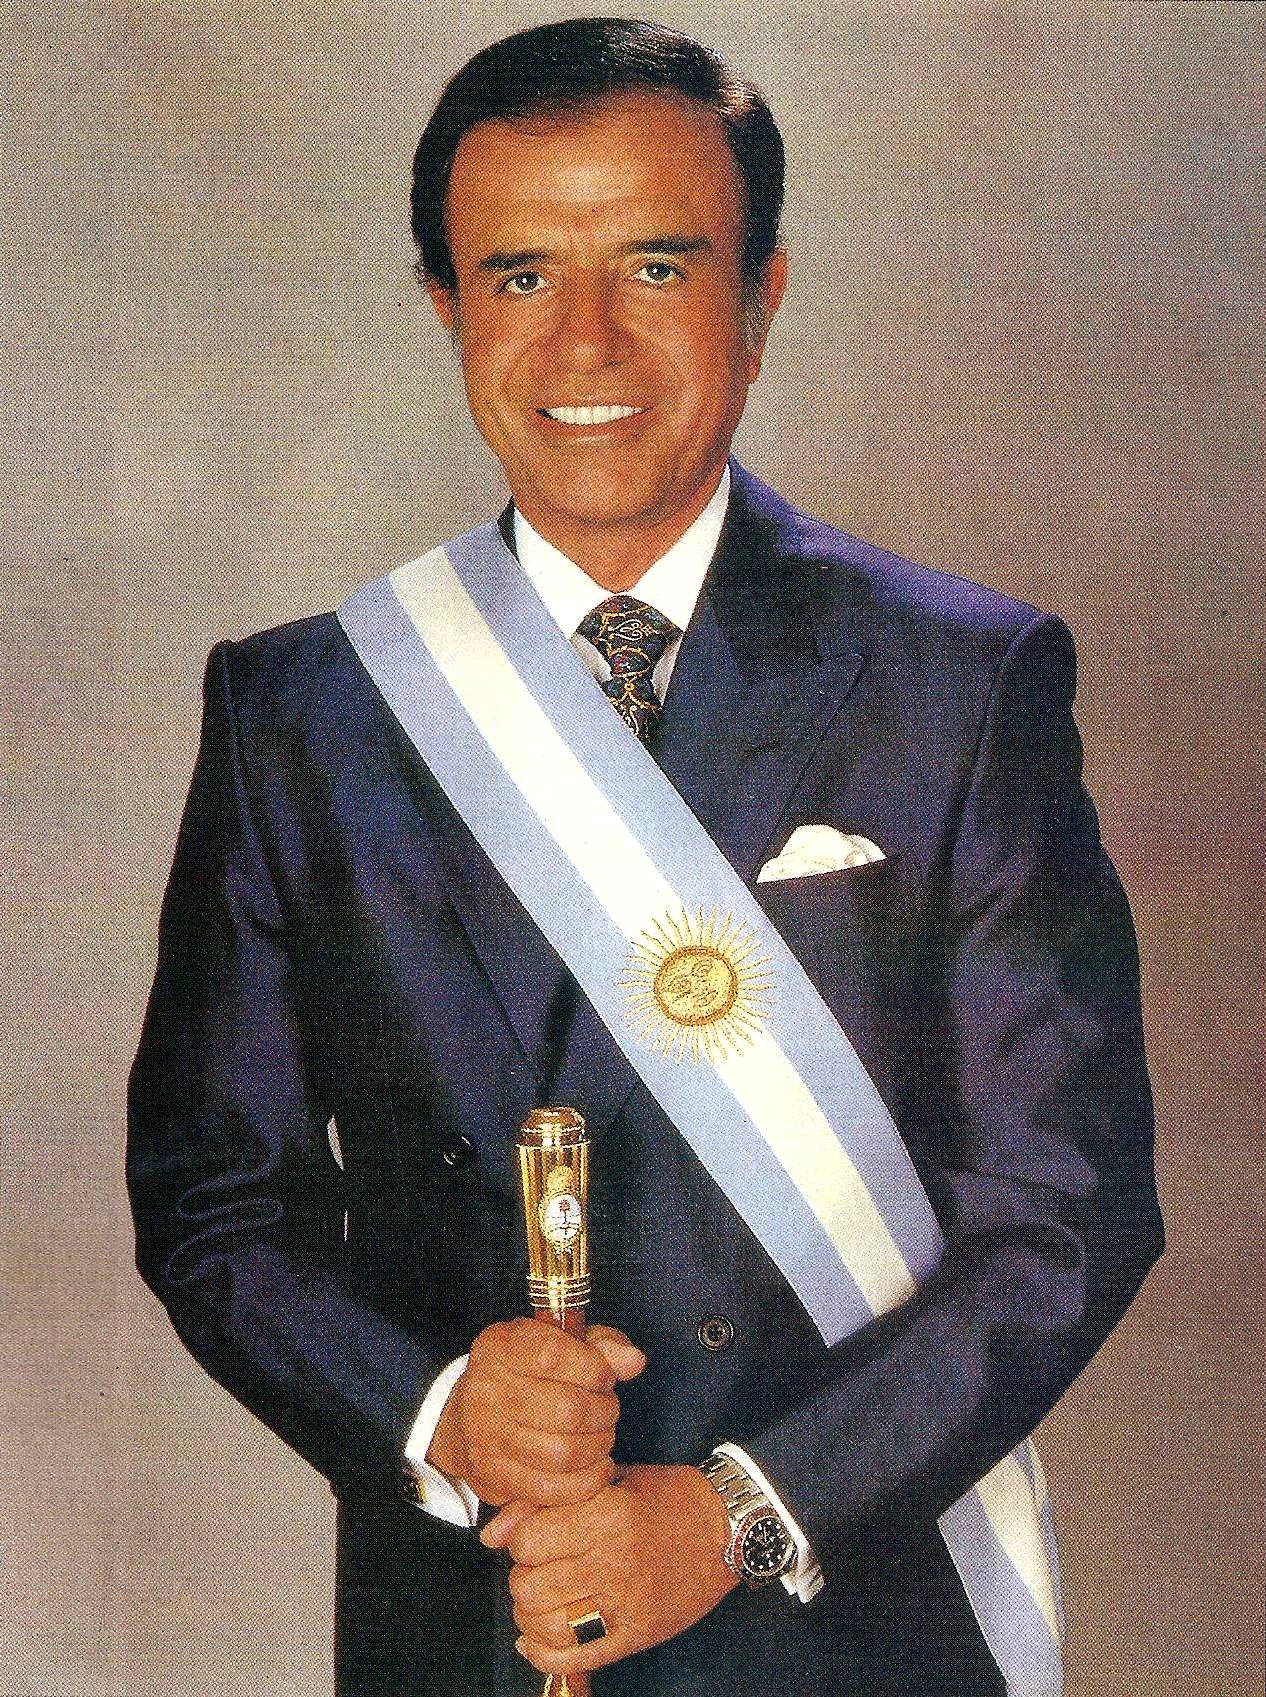 In Argentina... Bad luck takes a physical manifestation, specifically that of former Argentinian president Carlos Menem. To speak his name aloud is to essentially bring a curse upon yourself, so all within earshot will do the equivalent of knocking on wood, in this case, by touching their left breast or testicle.